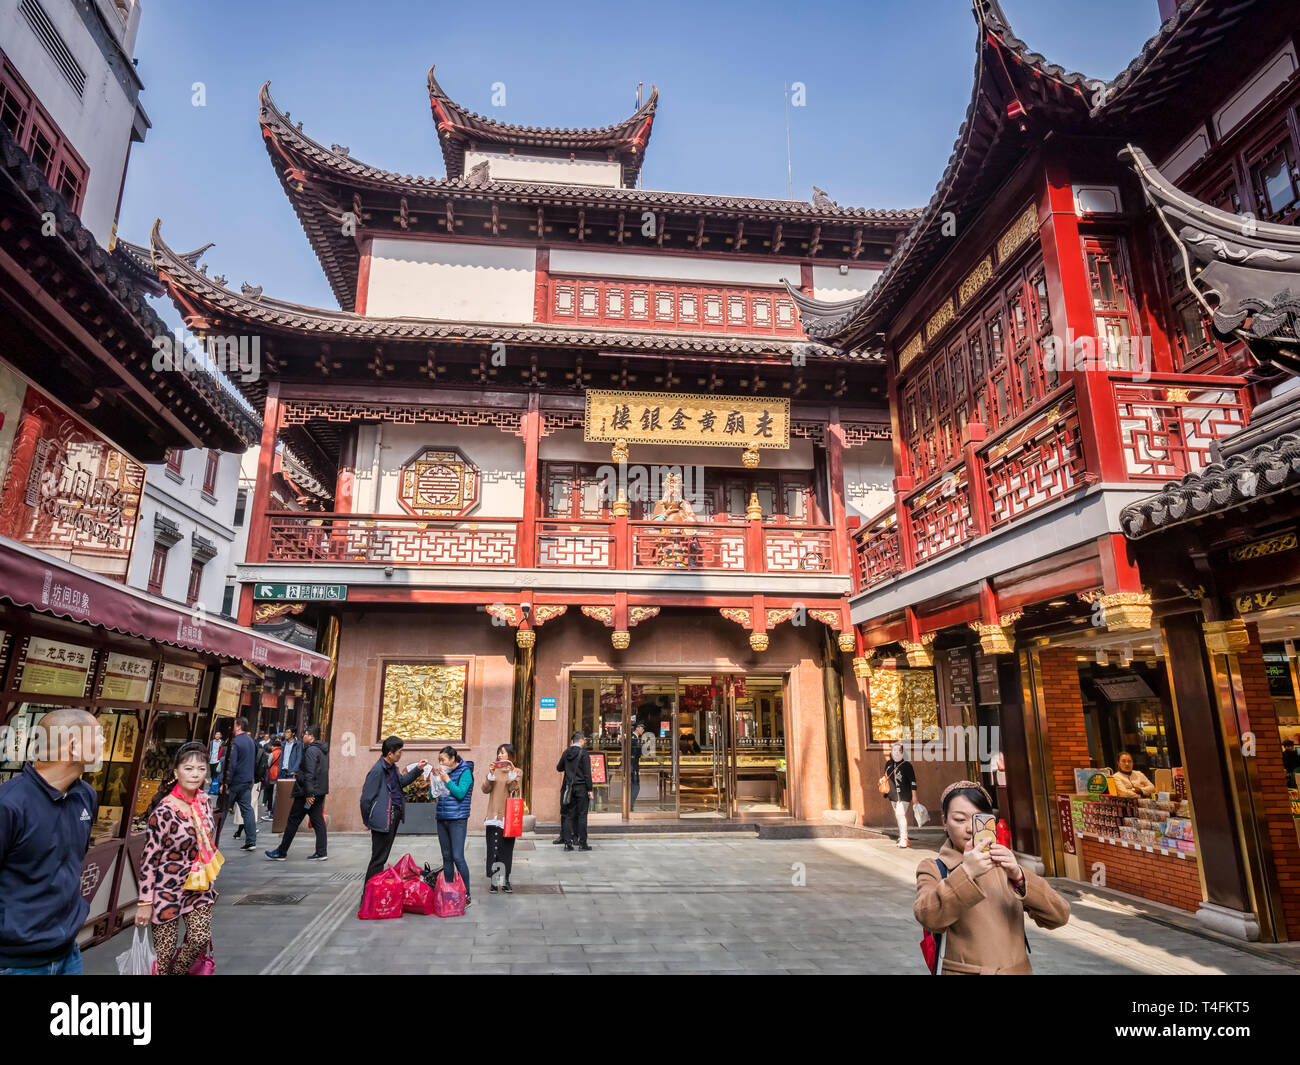 29 November 2018: Shanghai, China - Street in the Old Town shopping area, a major visitor attraction. Stock Photo